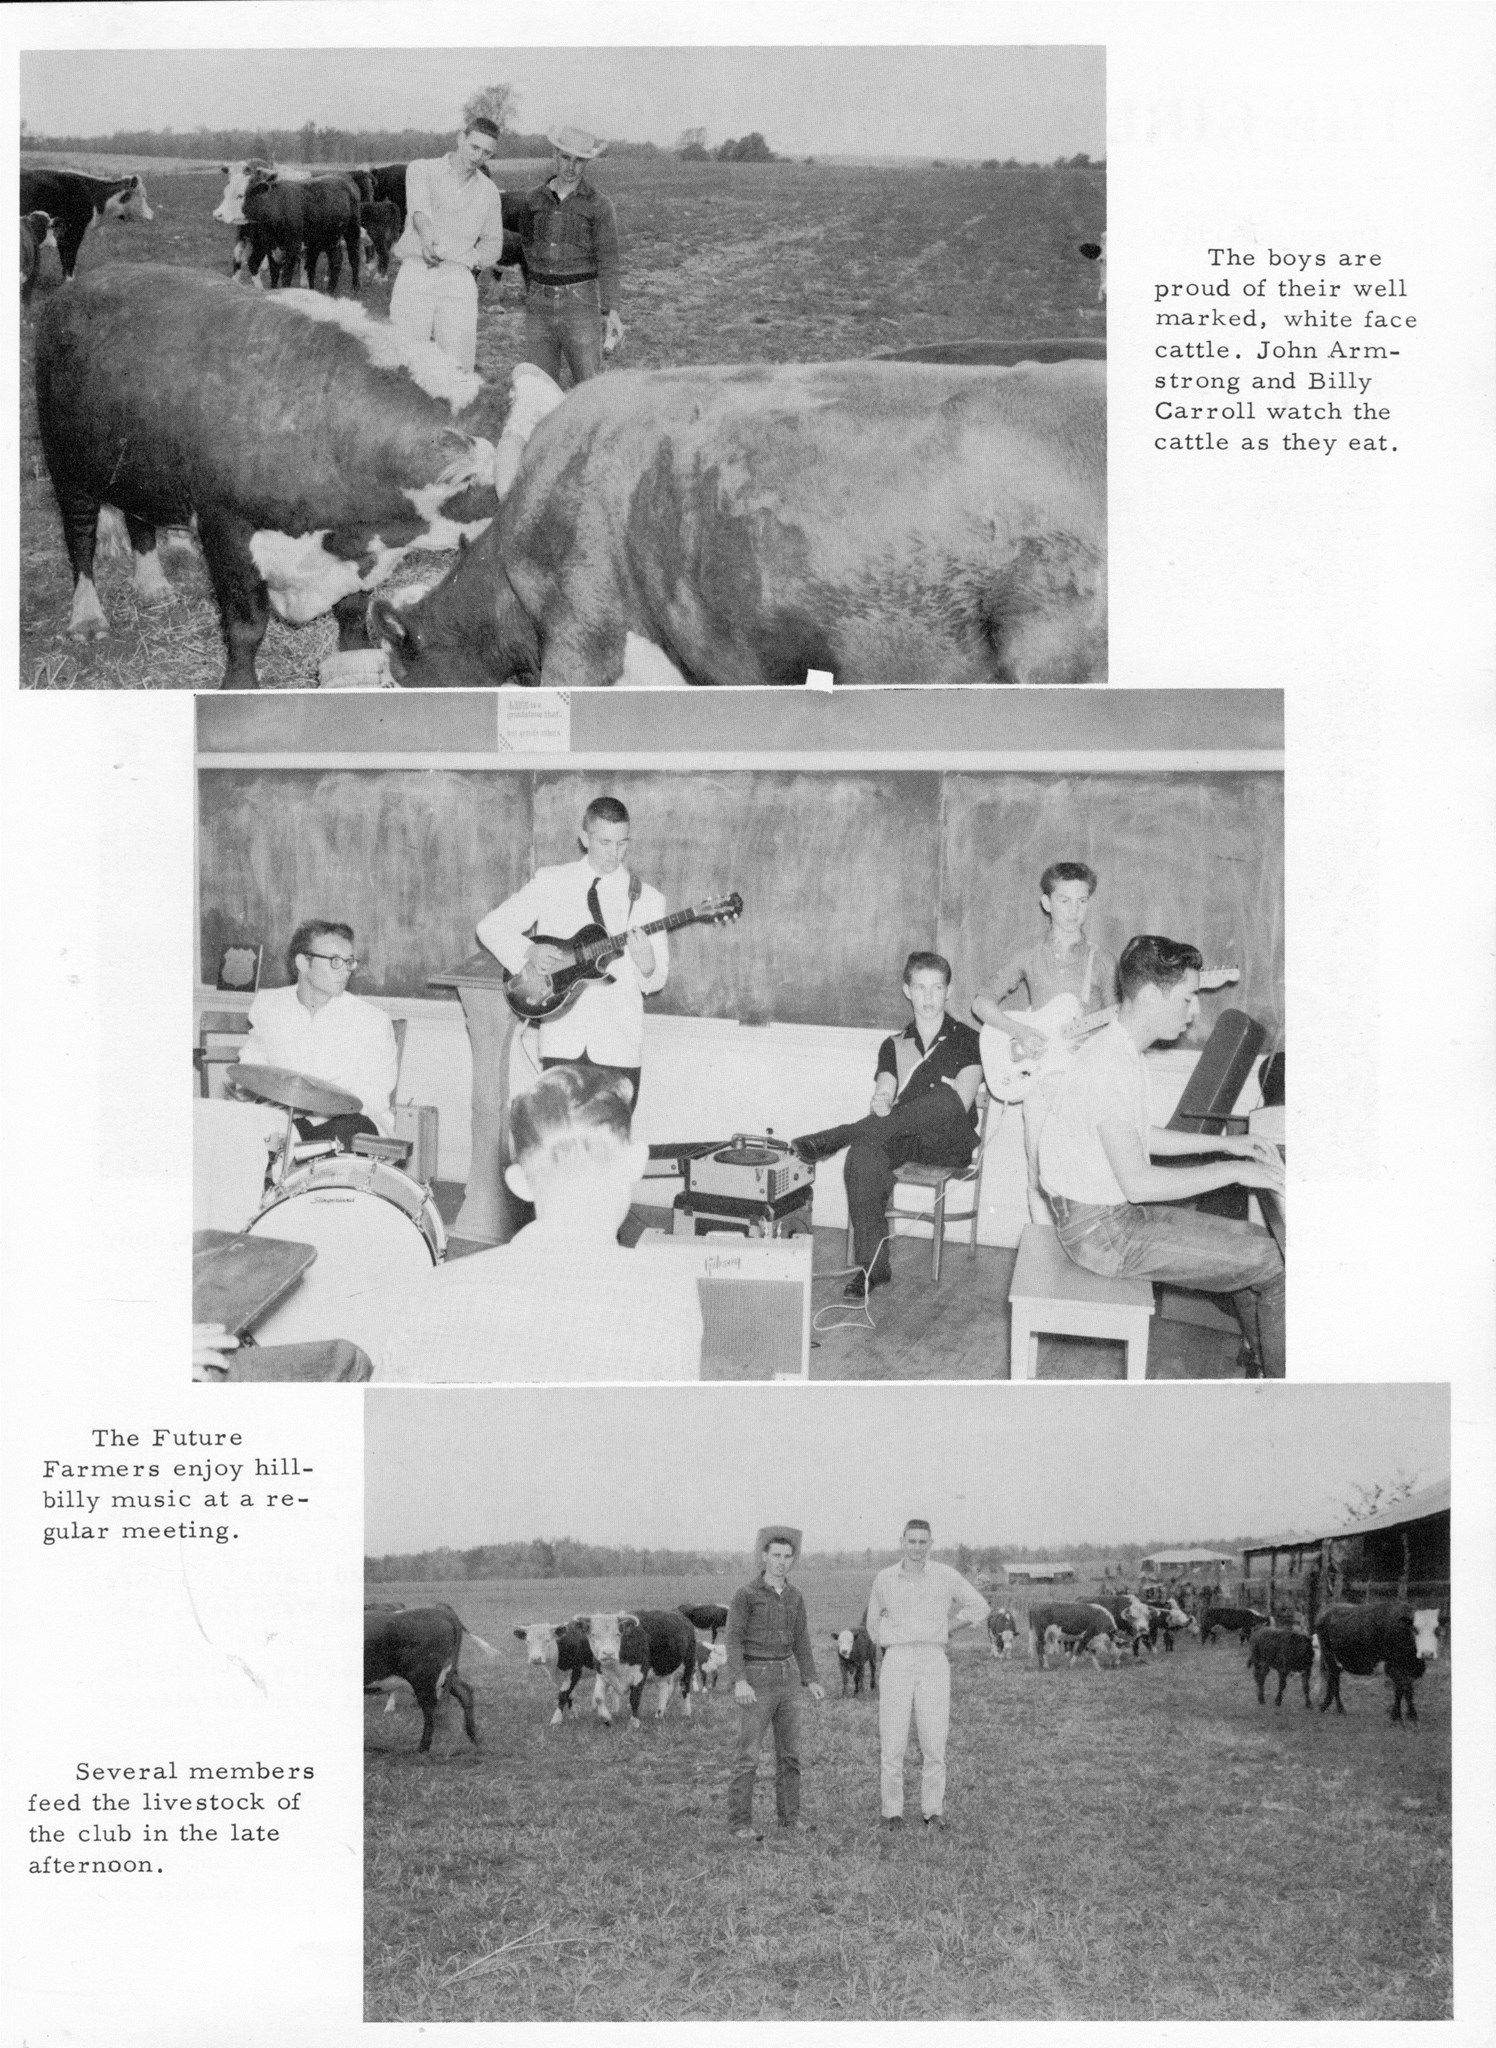 ../../../Images/Large/1959/Arclight-1959-pg0111.jpg